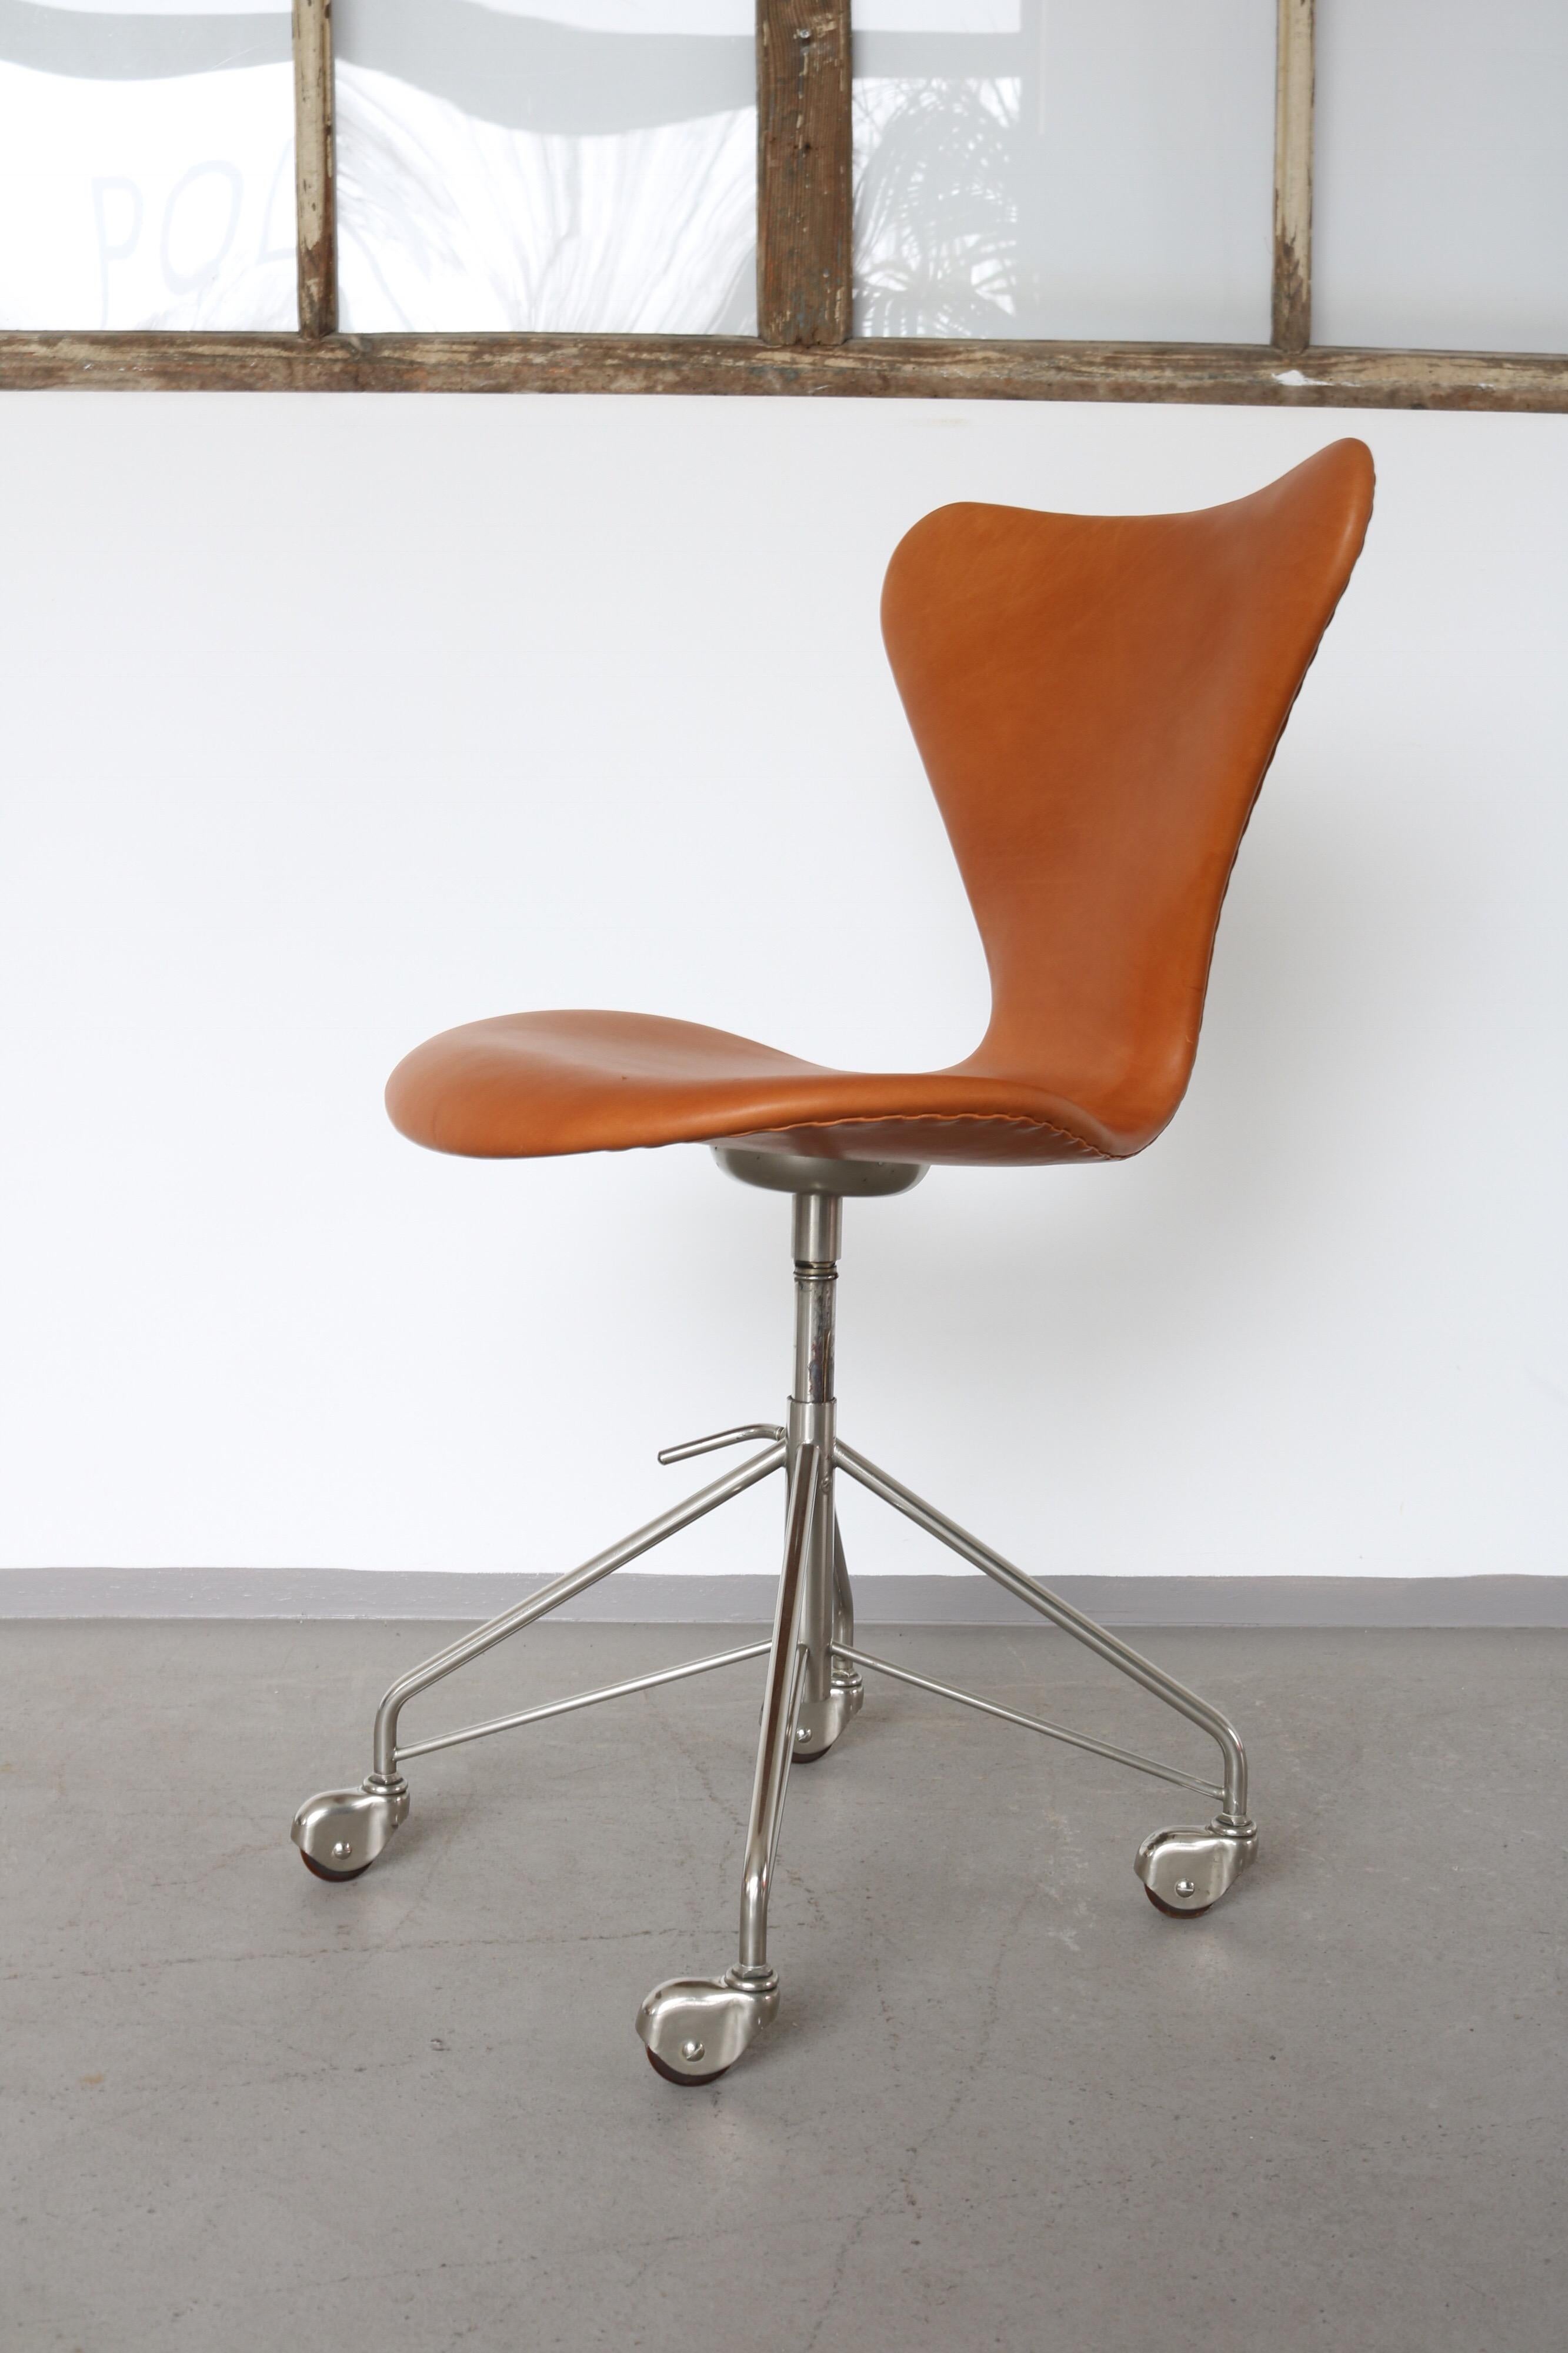 Rare Mid-Century Modern office desk chair model 3117 by Arne Jacobsen for Fritz Hansen. With the rare 4 rolls base. Reupholstered with a cognac Anilin leather. The height of the seat is adjustable.